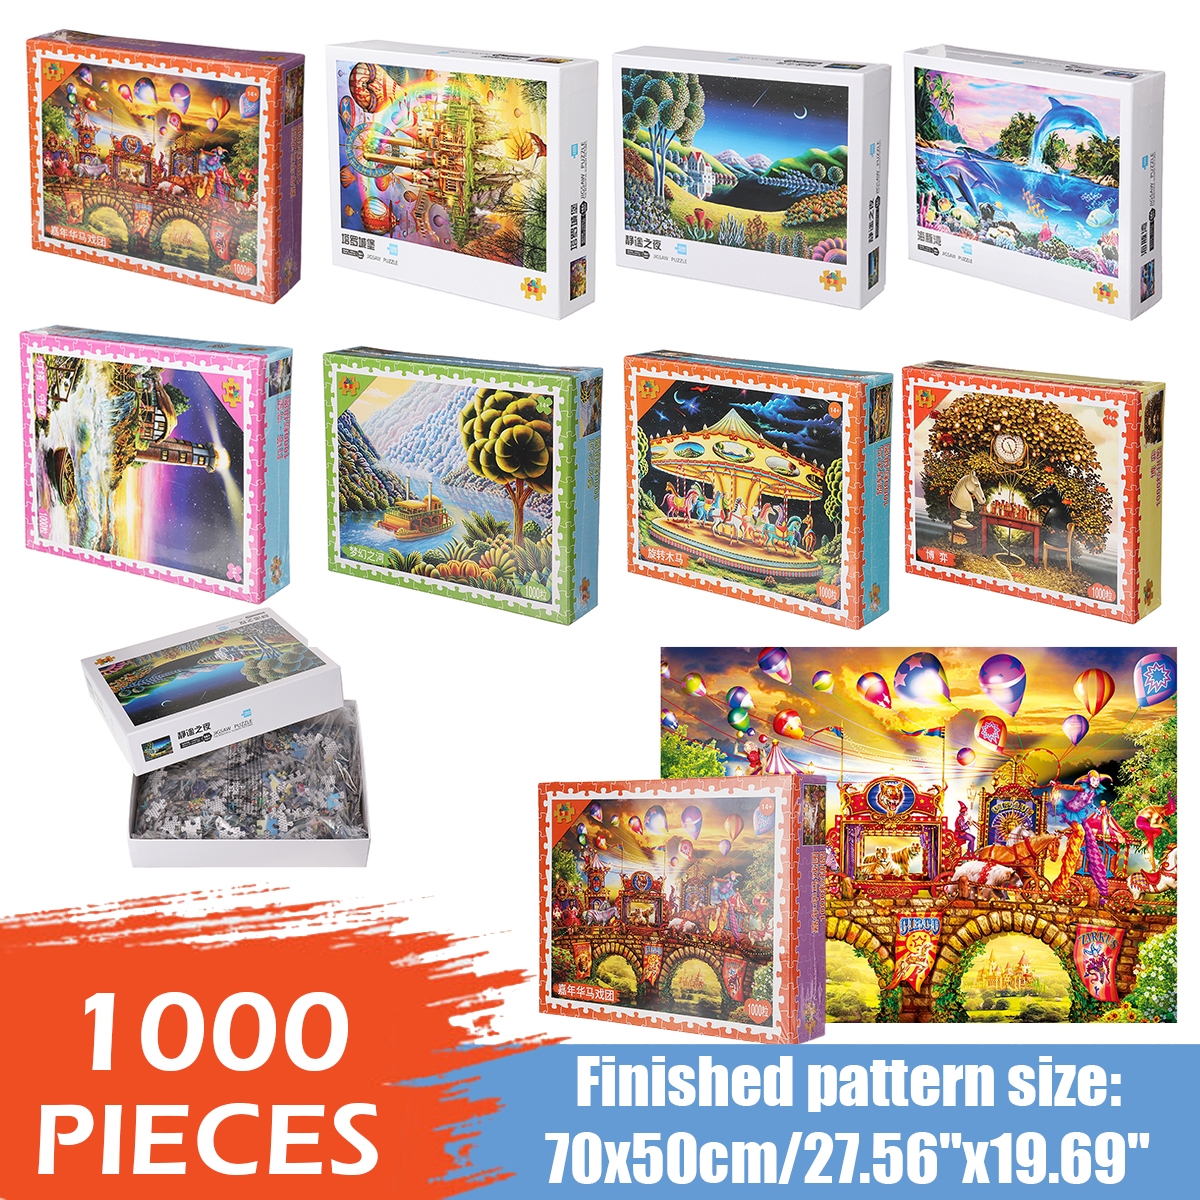 1000 Pieces Wooden Jigsaw Puzzle Toy For Adults Children Kids Games Educational Toys